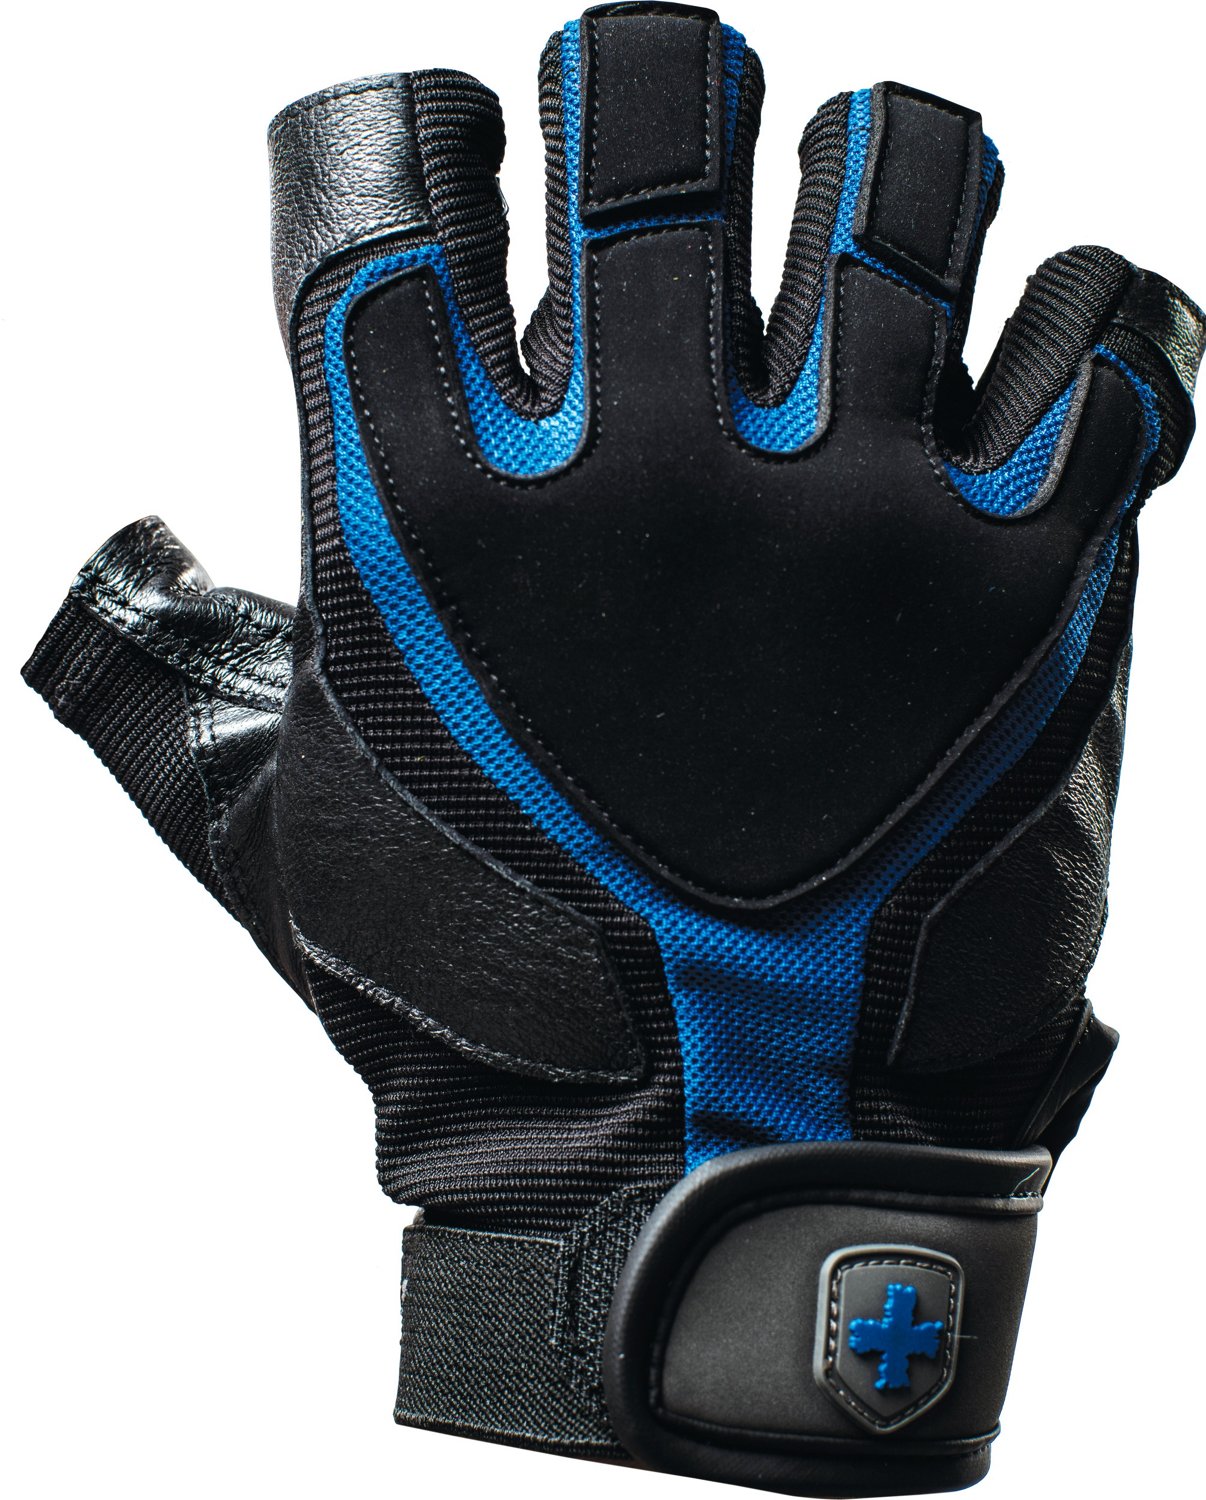 6 Day Academy Workout Gloves for Weight Loss